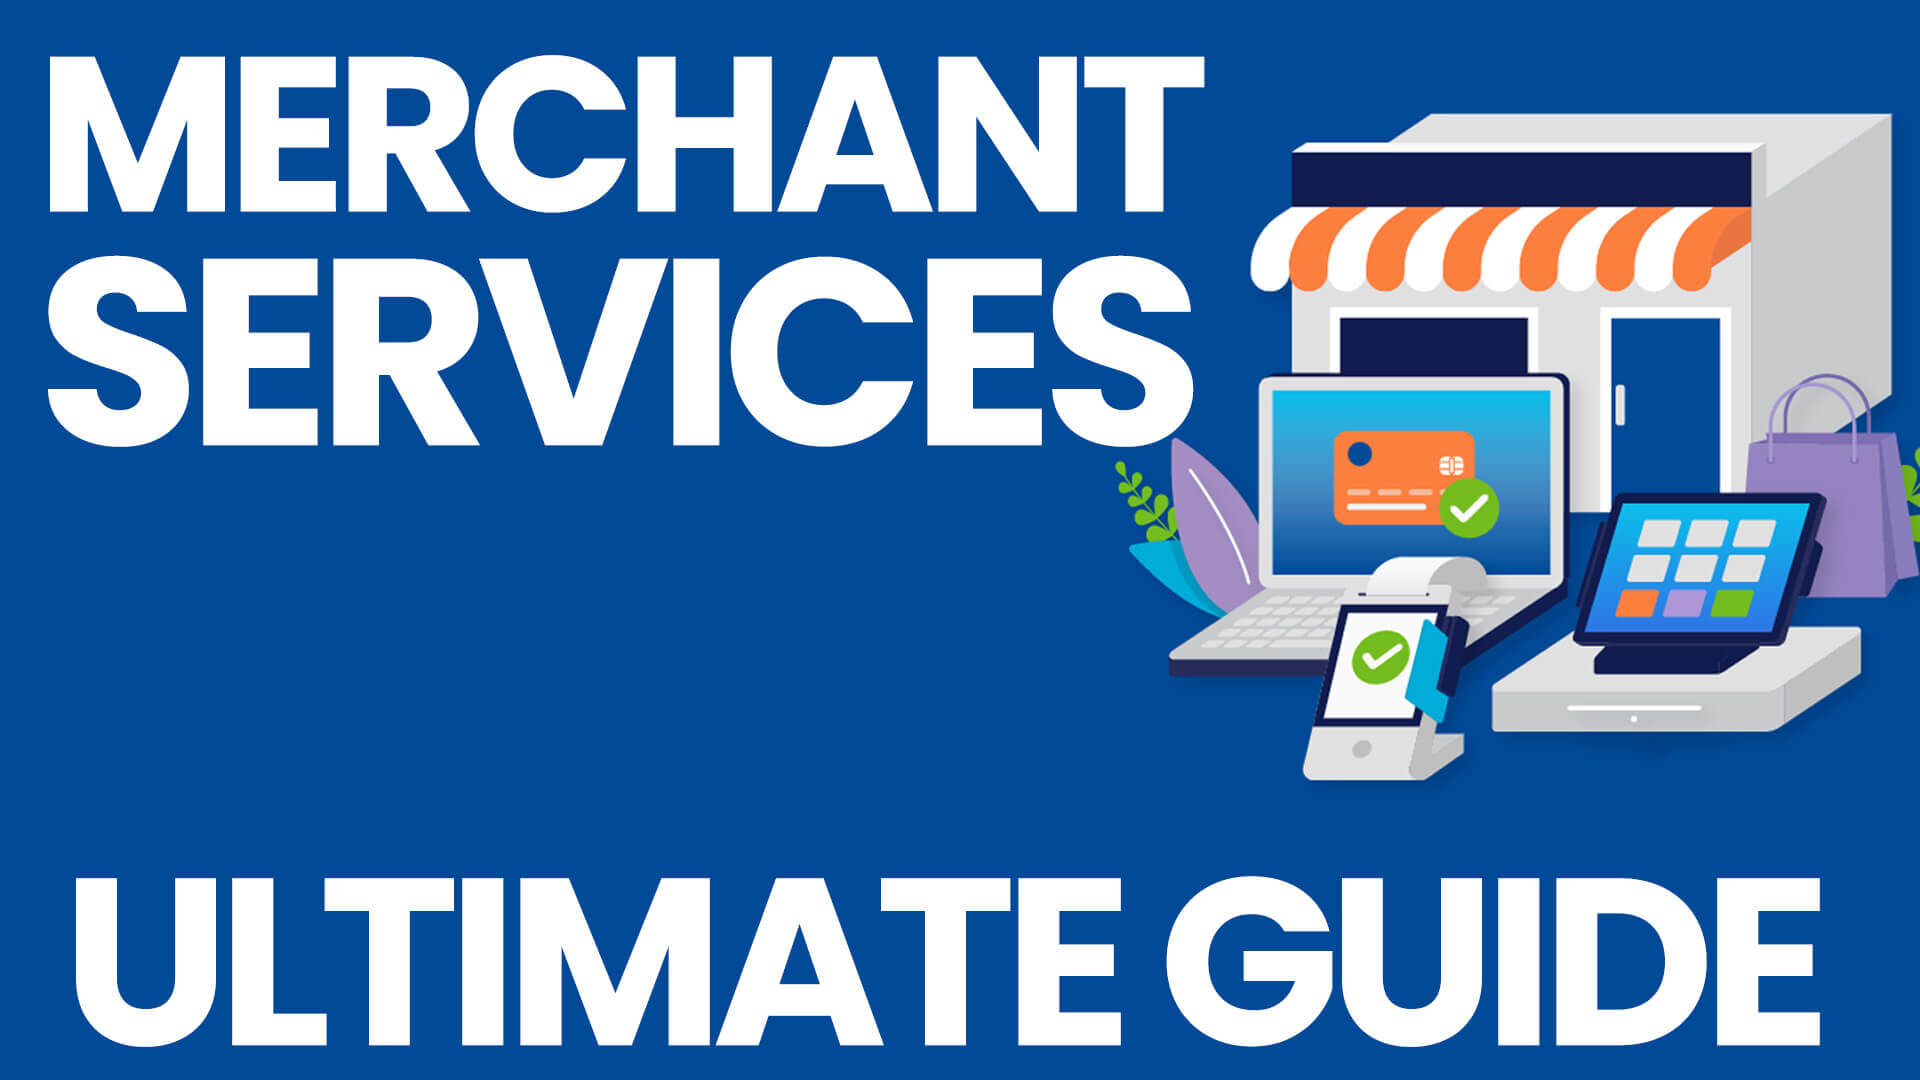 The Ultimate Guide to Merchant Services